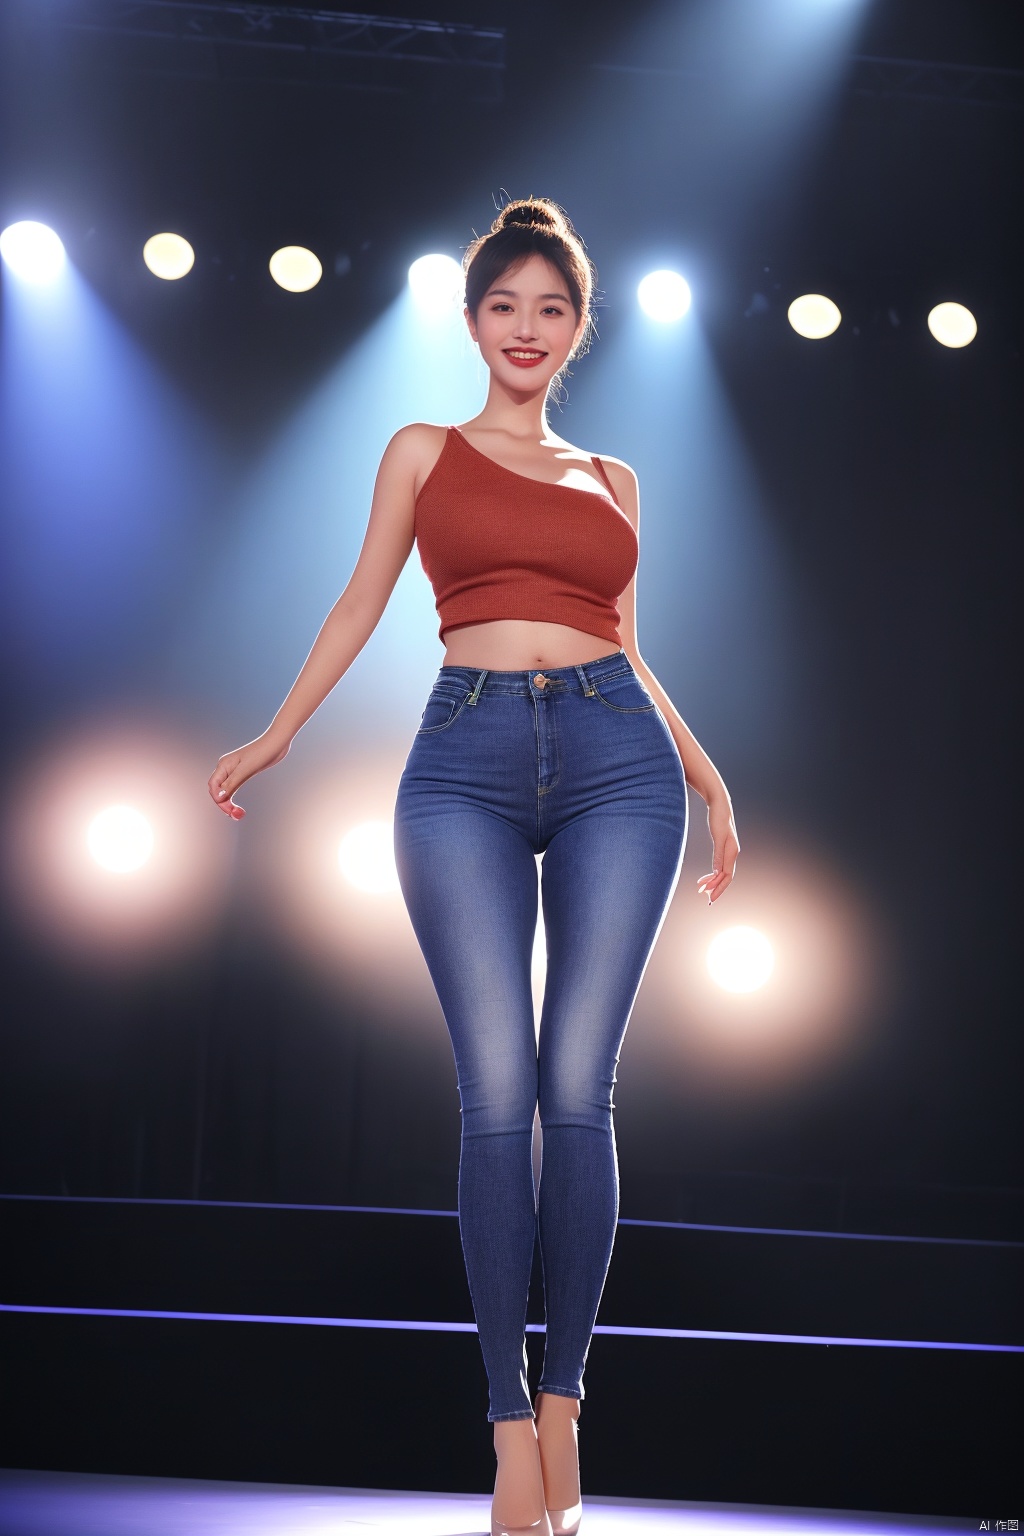 A young woman stands confidently in front of a dimly lit stage, her jeans-clad legs shoulder-width apart as she faces the audience with a bold smile. The spotlight casts a warm glow on her features, highlighting her bright eyes and plump lips. She exudes confidence and charm, commanding attention from the crowd.